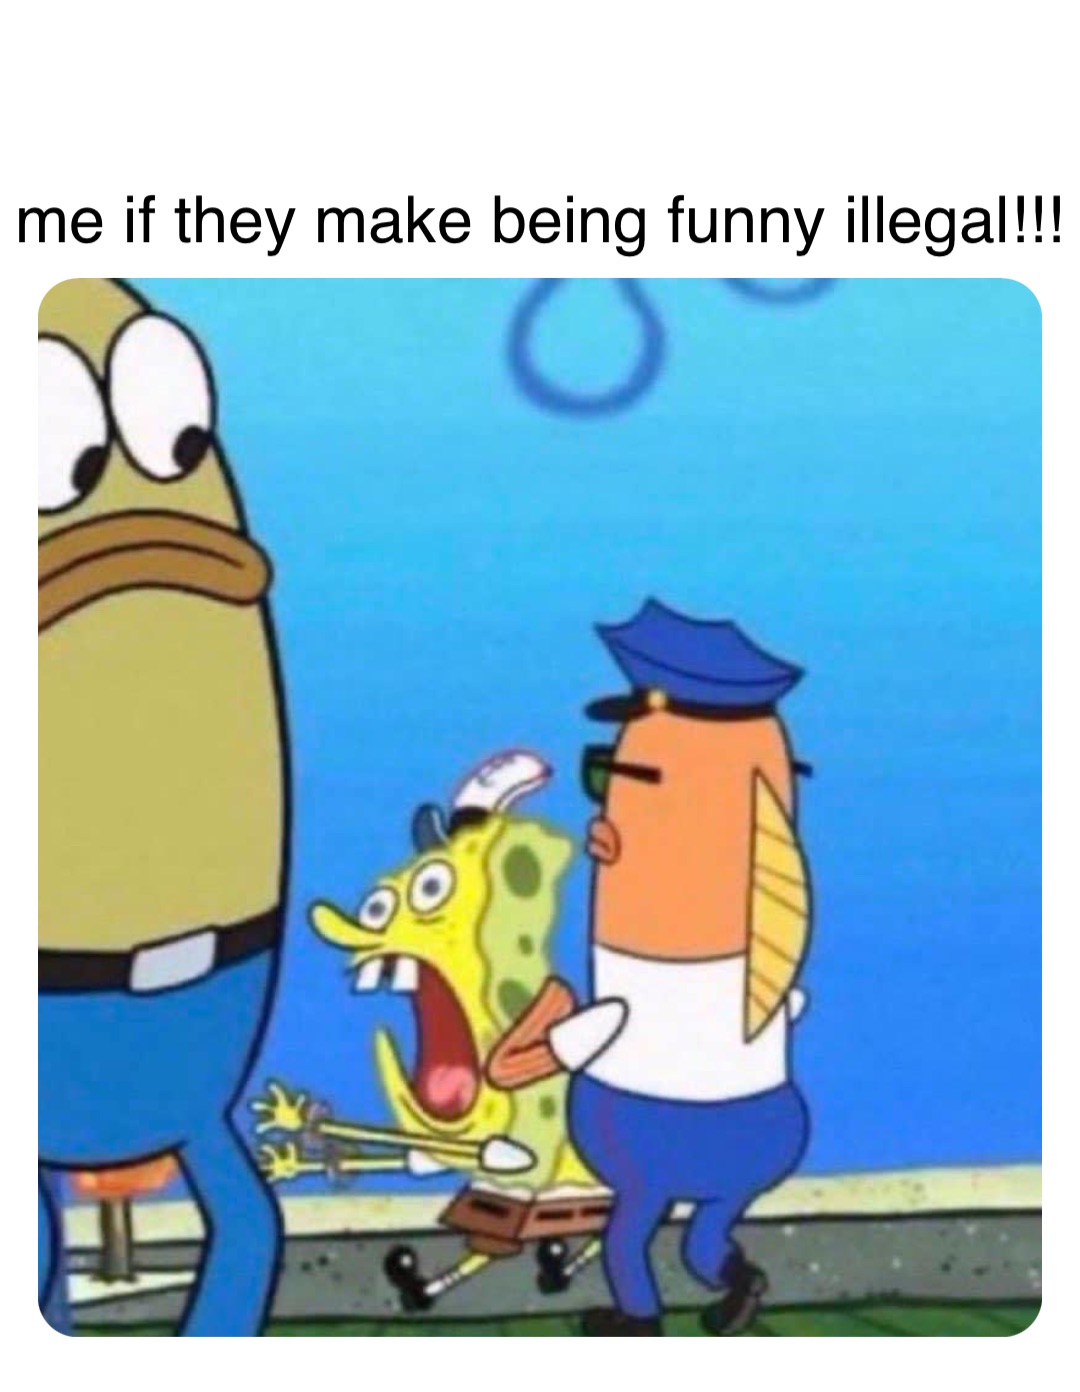 Double tap to edit me if they make being funny illegal!!!